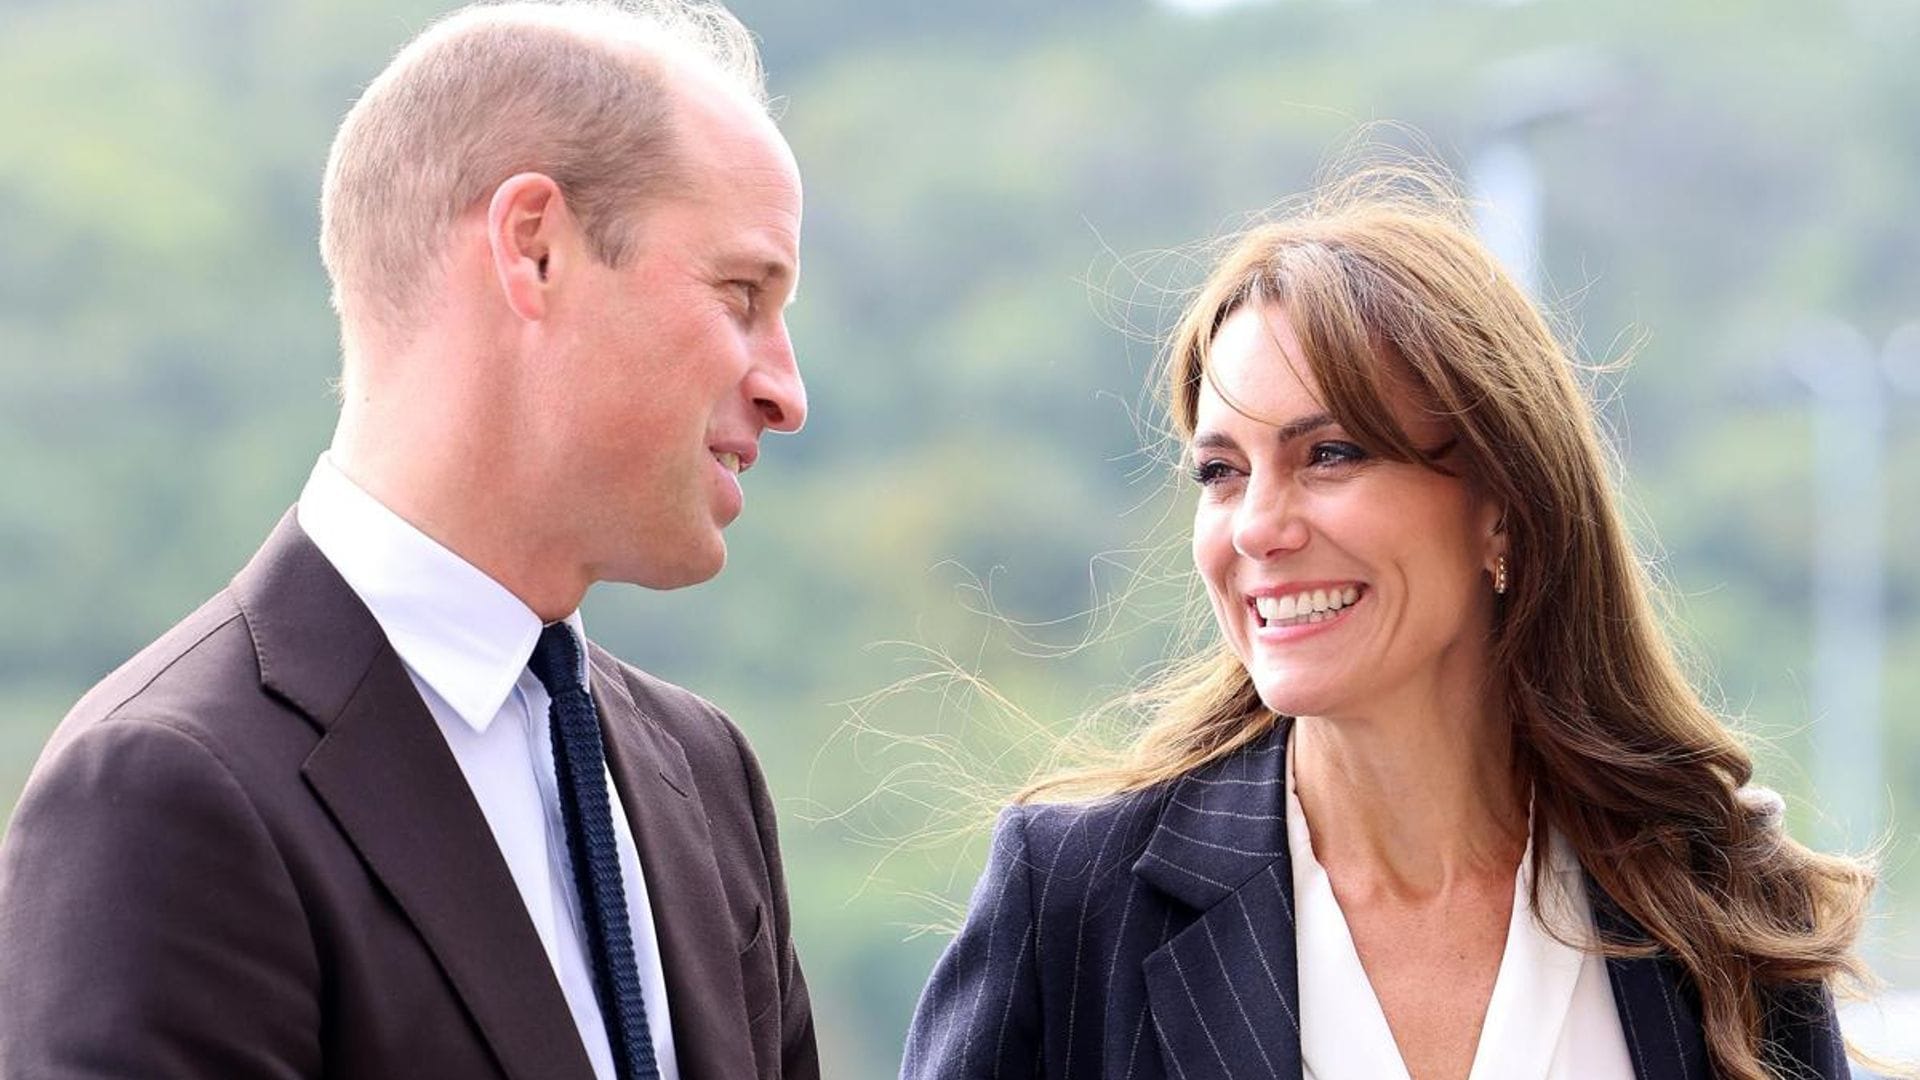 Prince William promises to look after wife Catherine as he returns to public duties